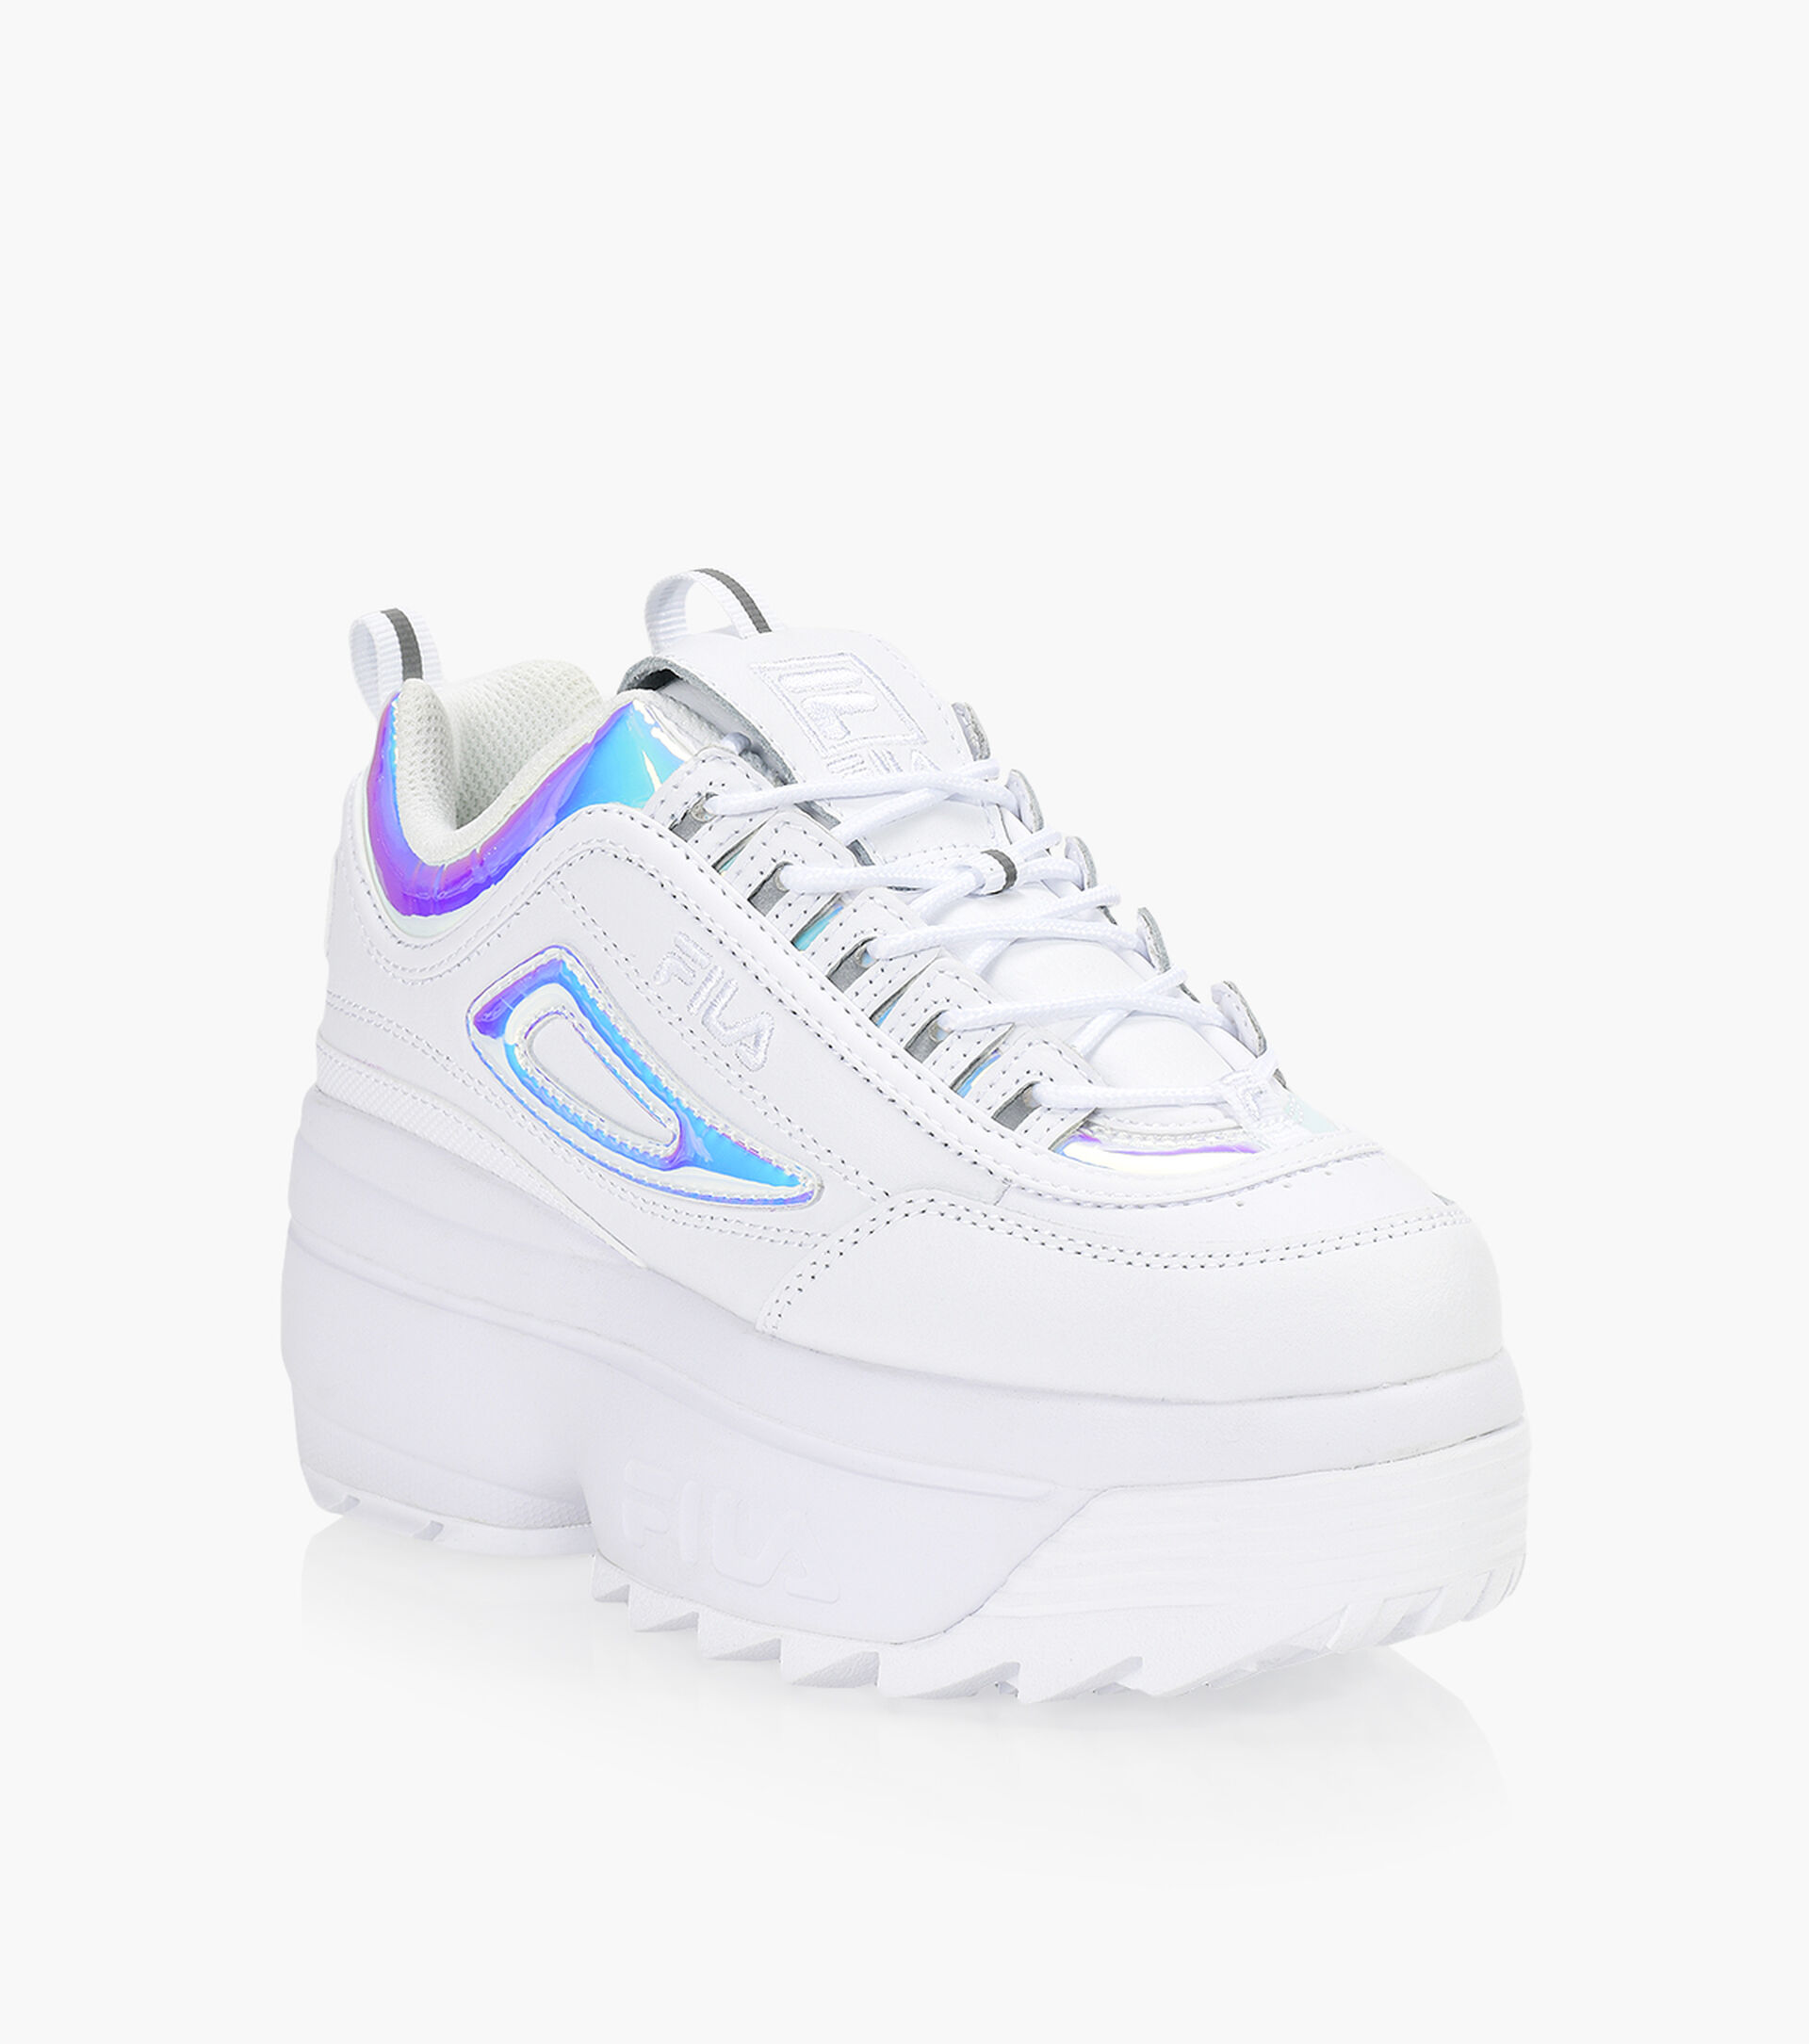 FILA DISRUPTOR 2 WEDGE IRIDESCENT - White Leather | Browns Shoes